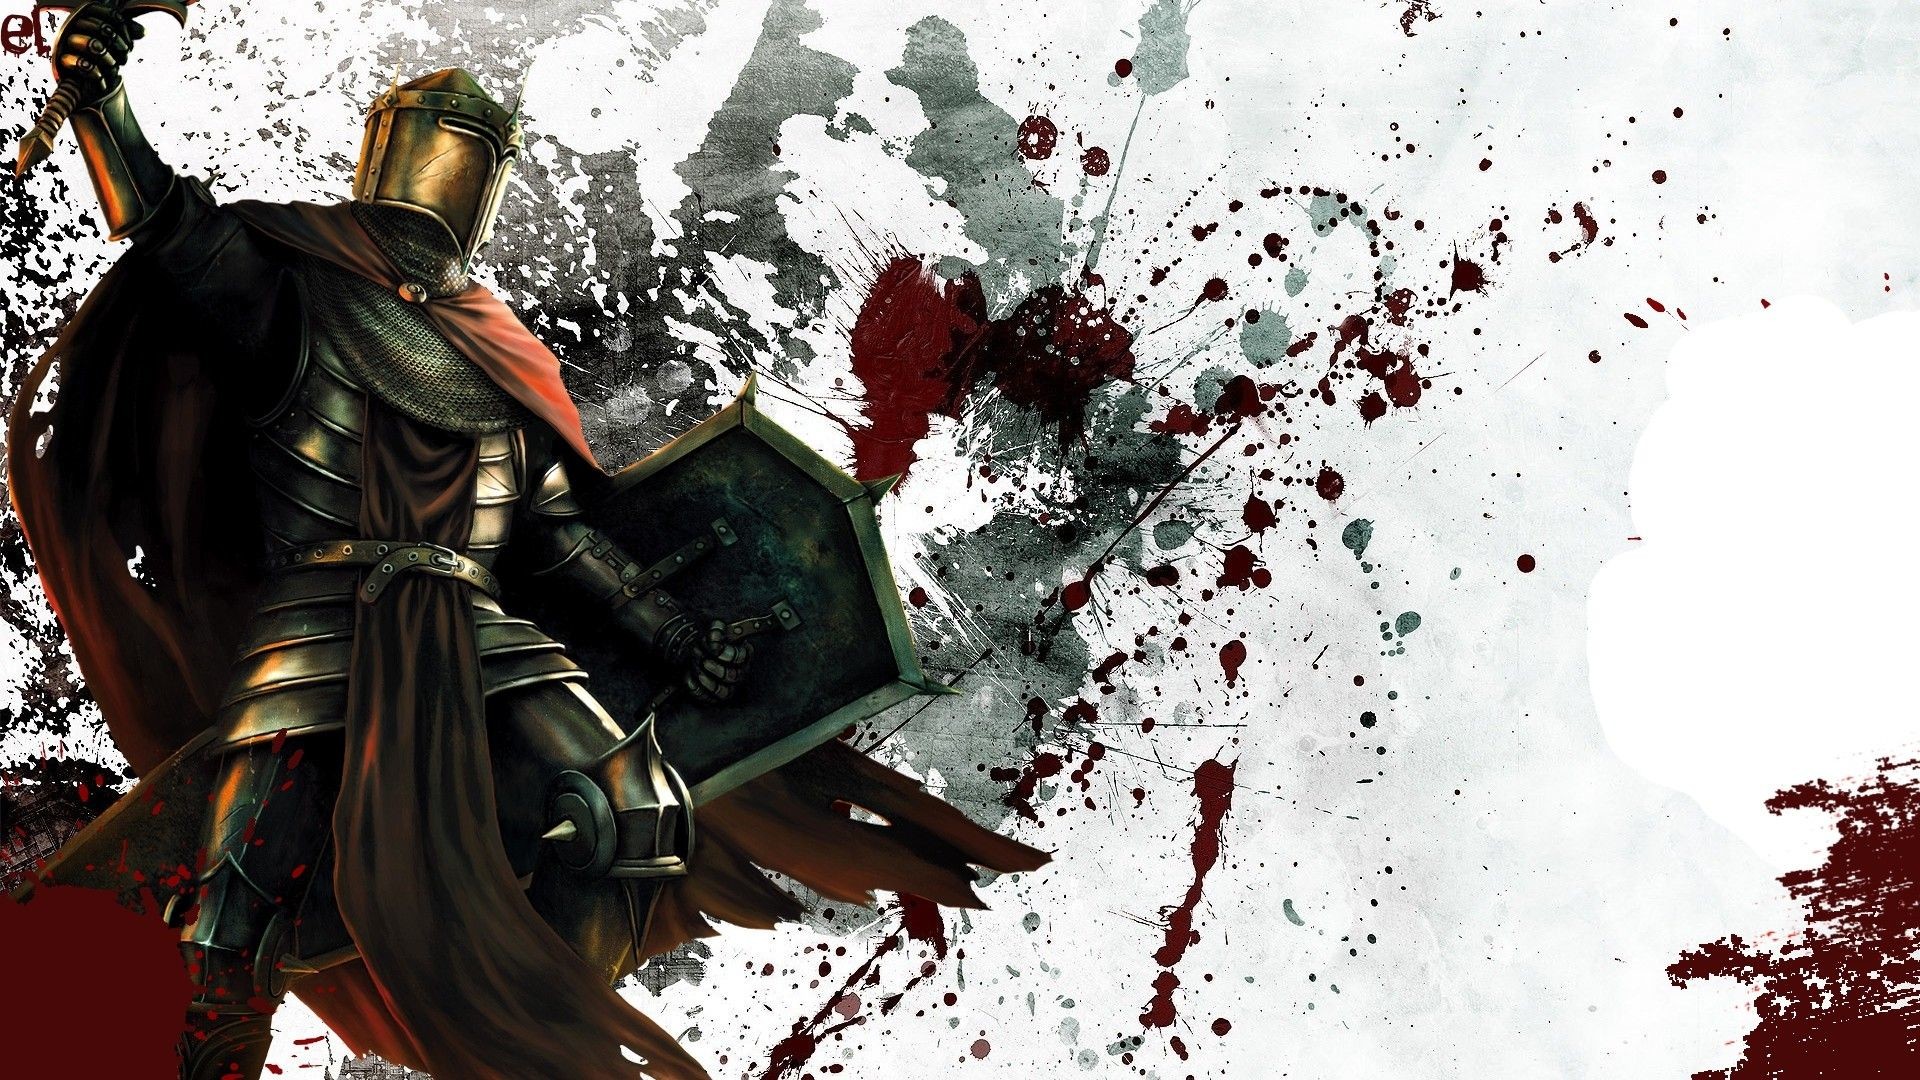 1920x1080 Gallery for - medieval knights fighting wallpaper